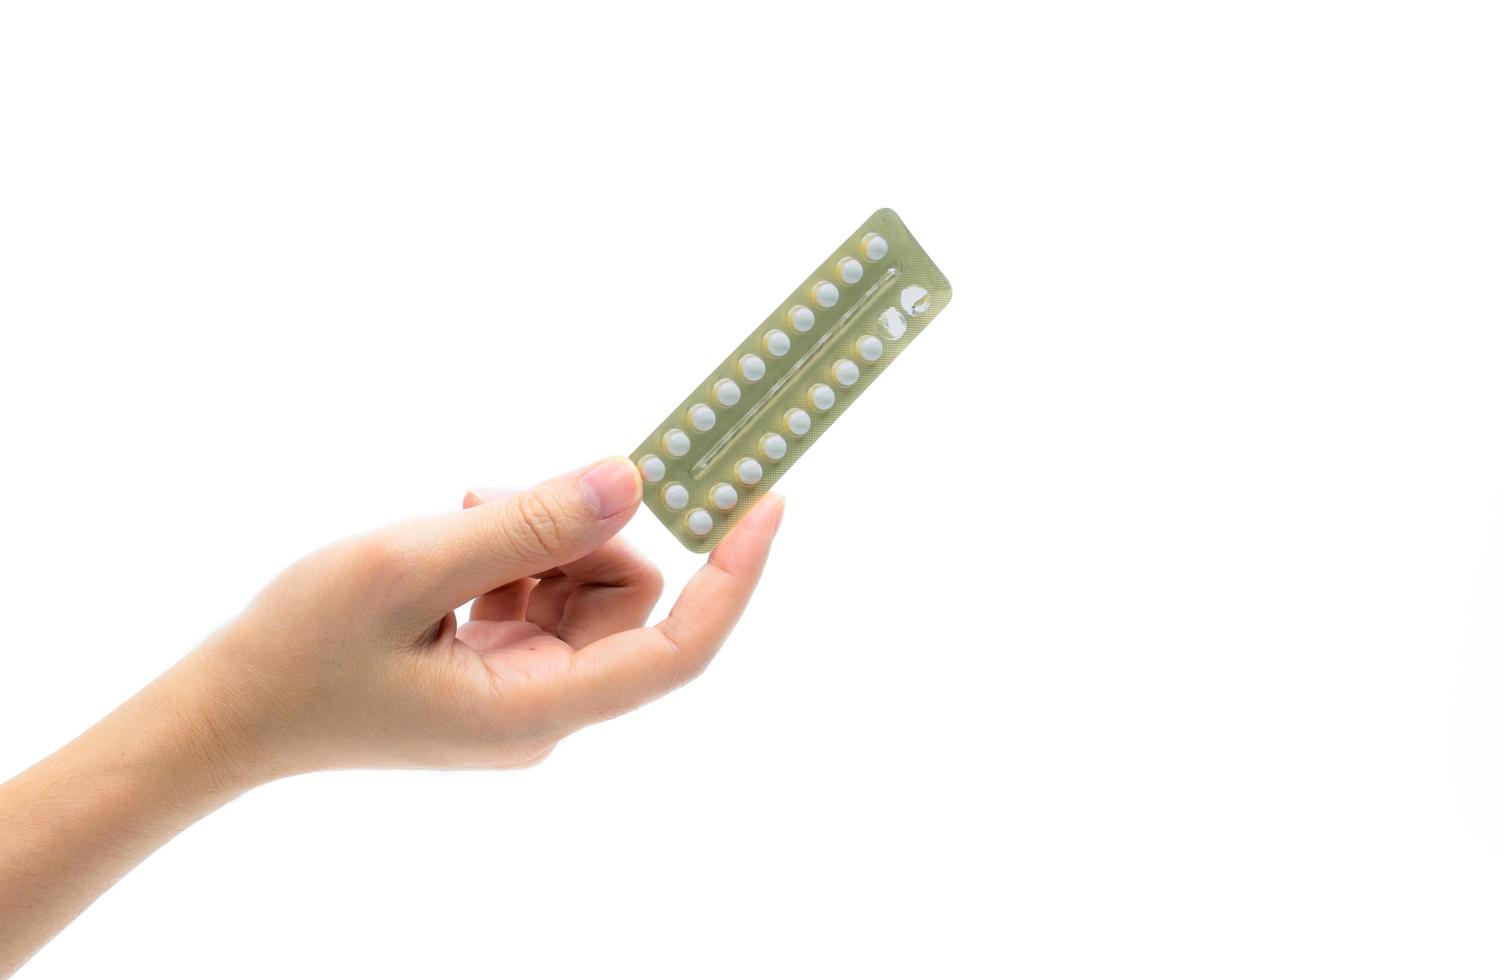 Woman hand taking birth control pills. Asian adult woman holding pack of contraceptive pills isolated on white background with clipping path. Choosing family planning with birth control pills concept photo